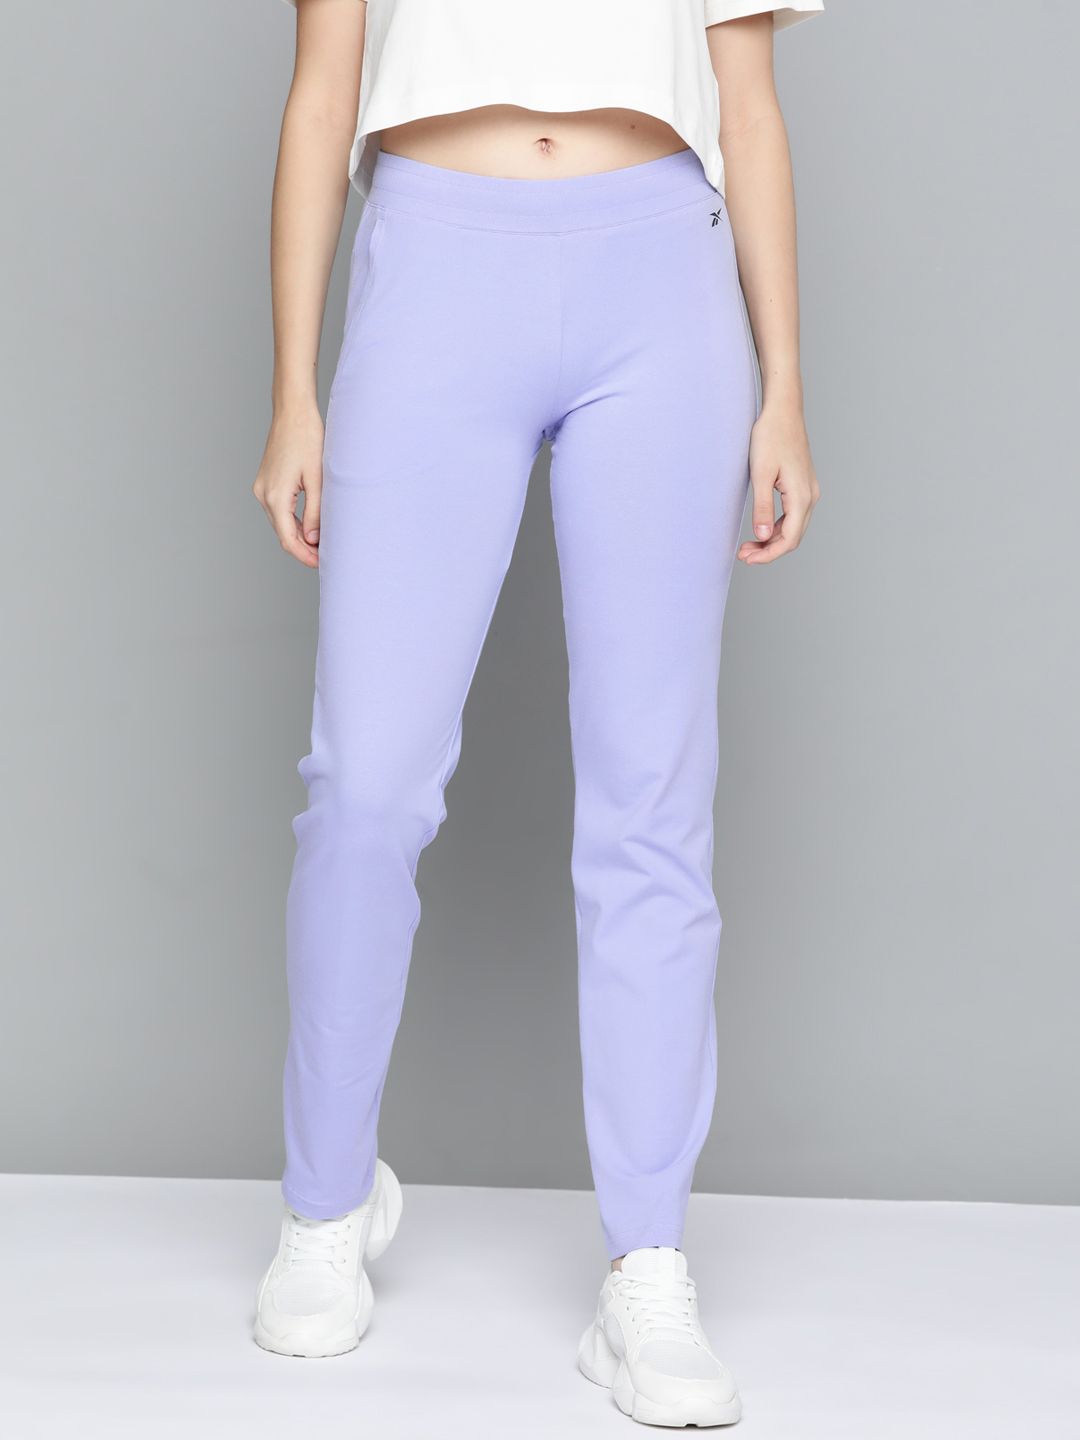 Reebok Women Lavender Foundation Solid Training Track Pants Price in India